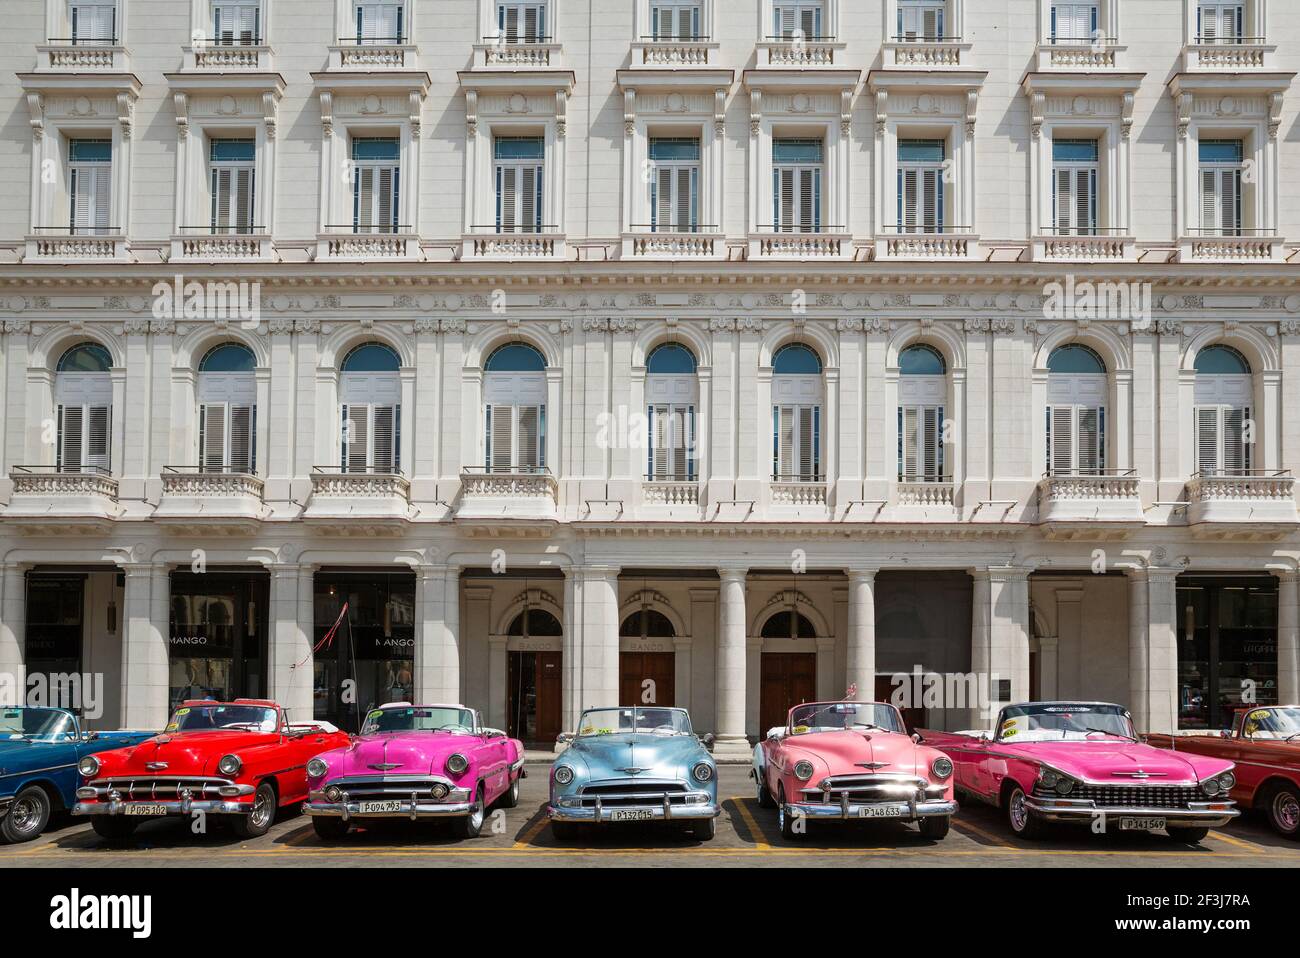 US classic cars from the 1950s can be hired for touristic city tours, Havana, Cuba Stock Photo